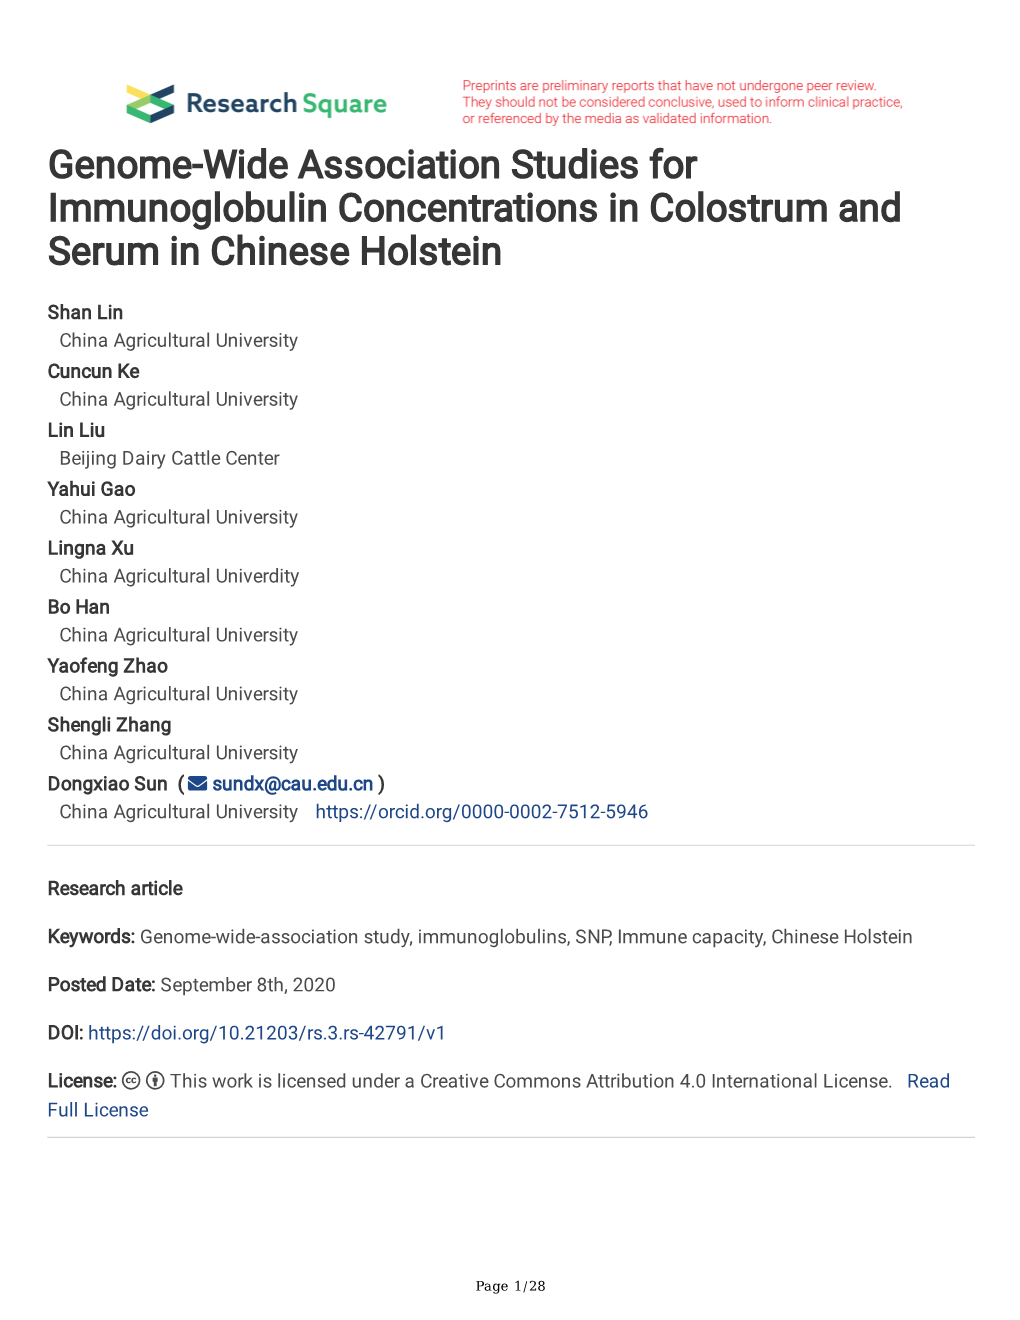 Genome-Wide Association Studies for Immunoglobulin Concentrations in Colostrum and Serum in Chinese Holstein